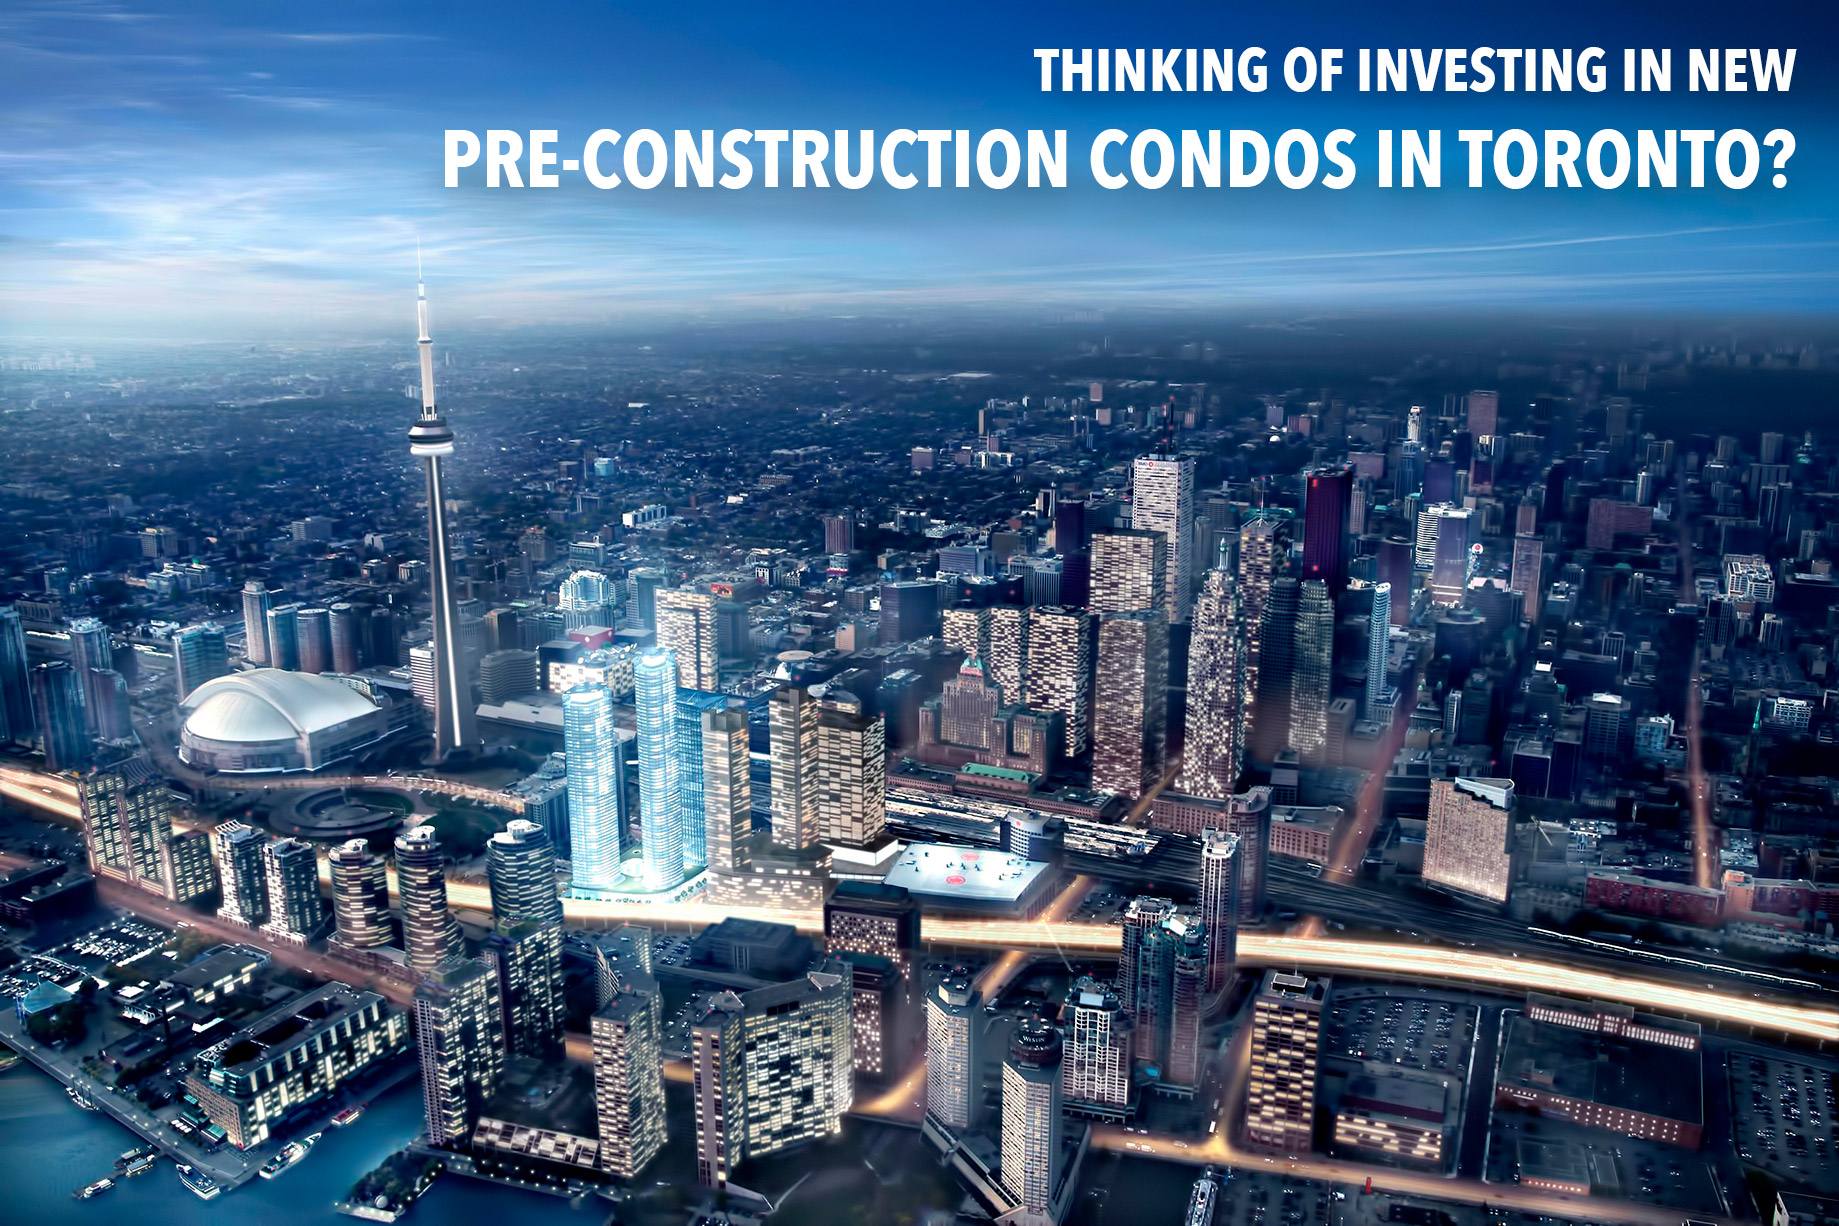 Thinking of Investing in New Pre-Construction Condos in Toronto?